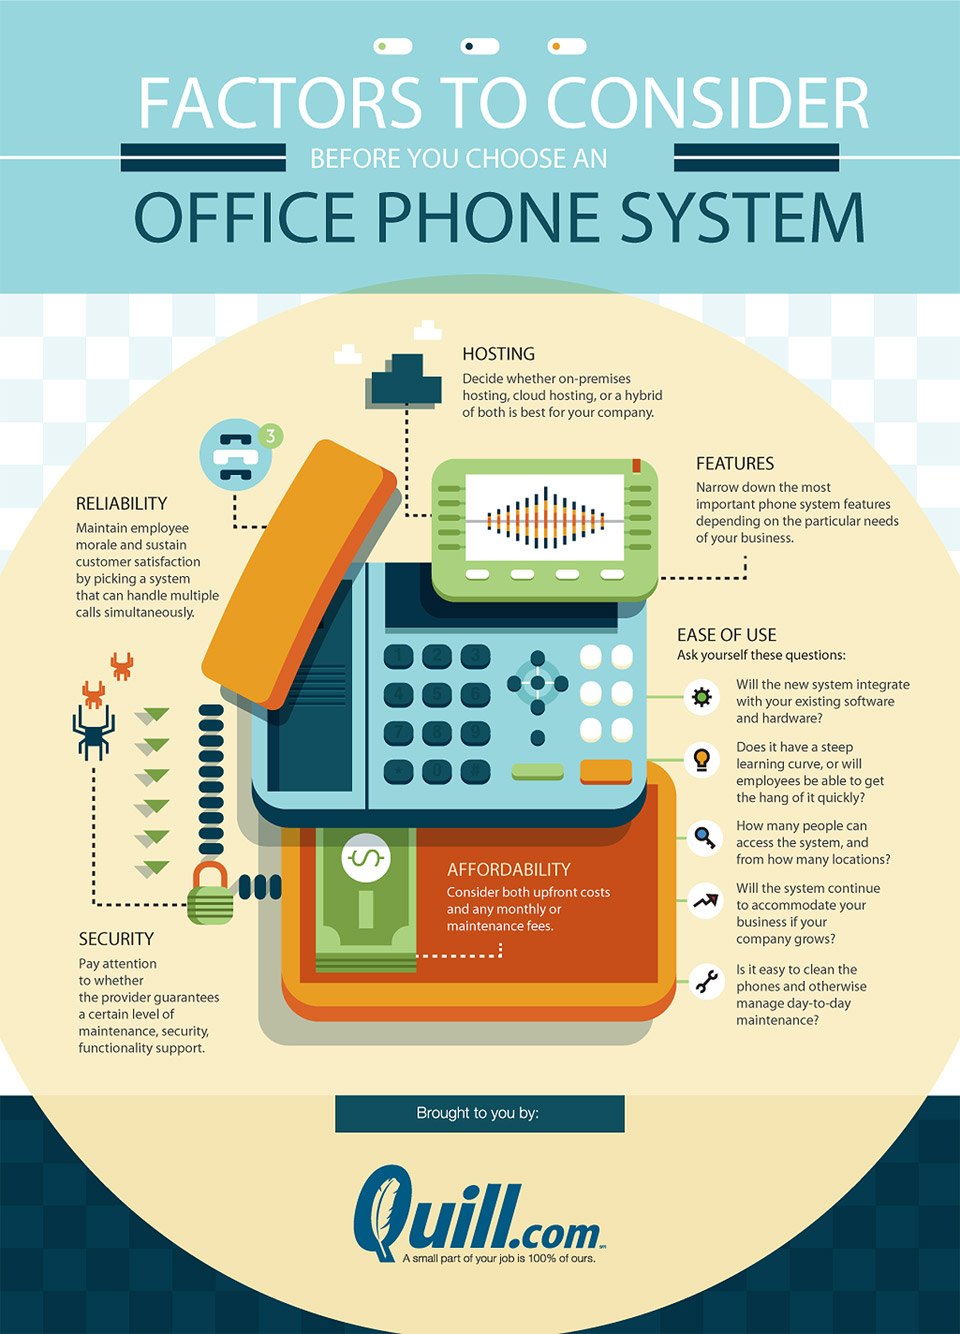 Best office phone system for small businesses